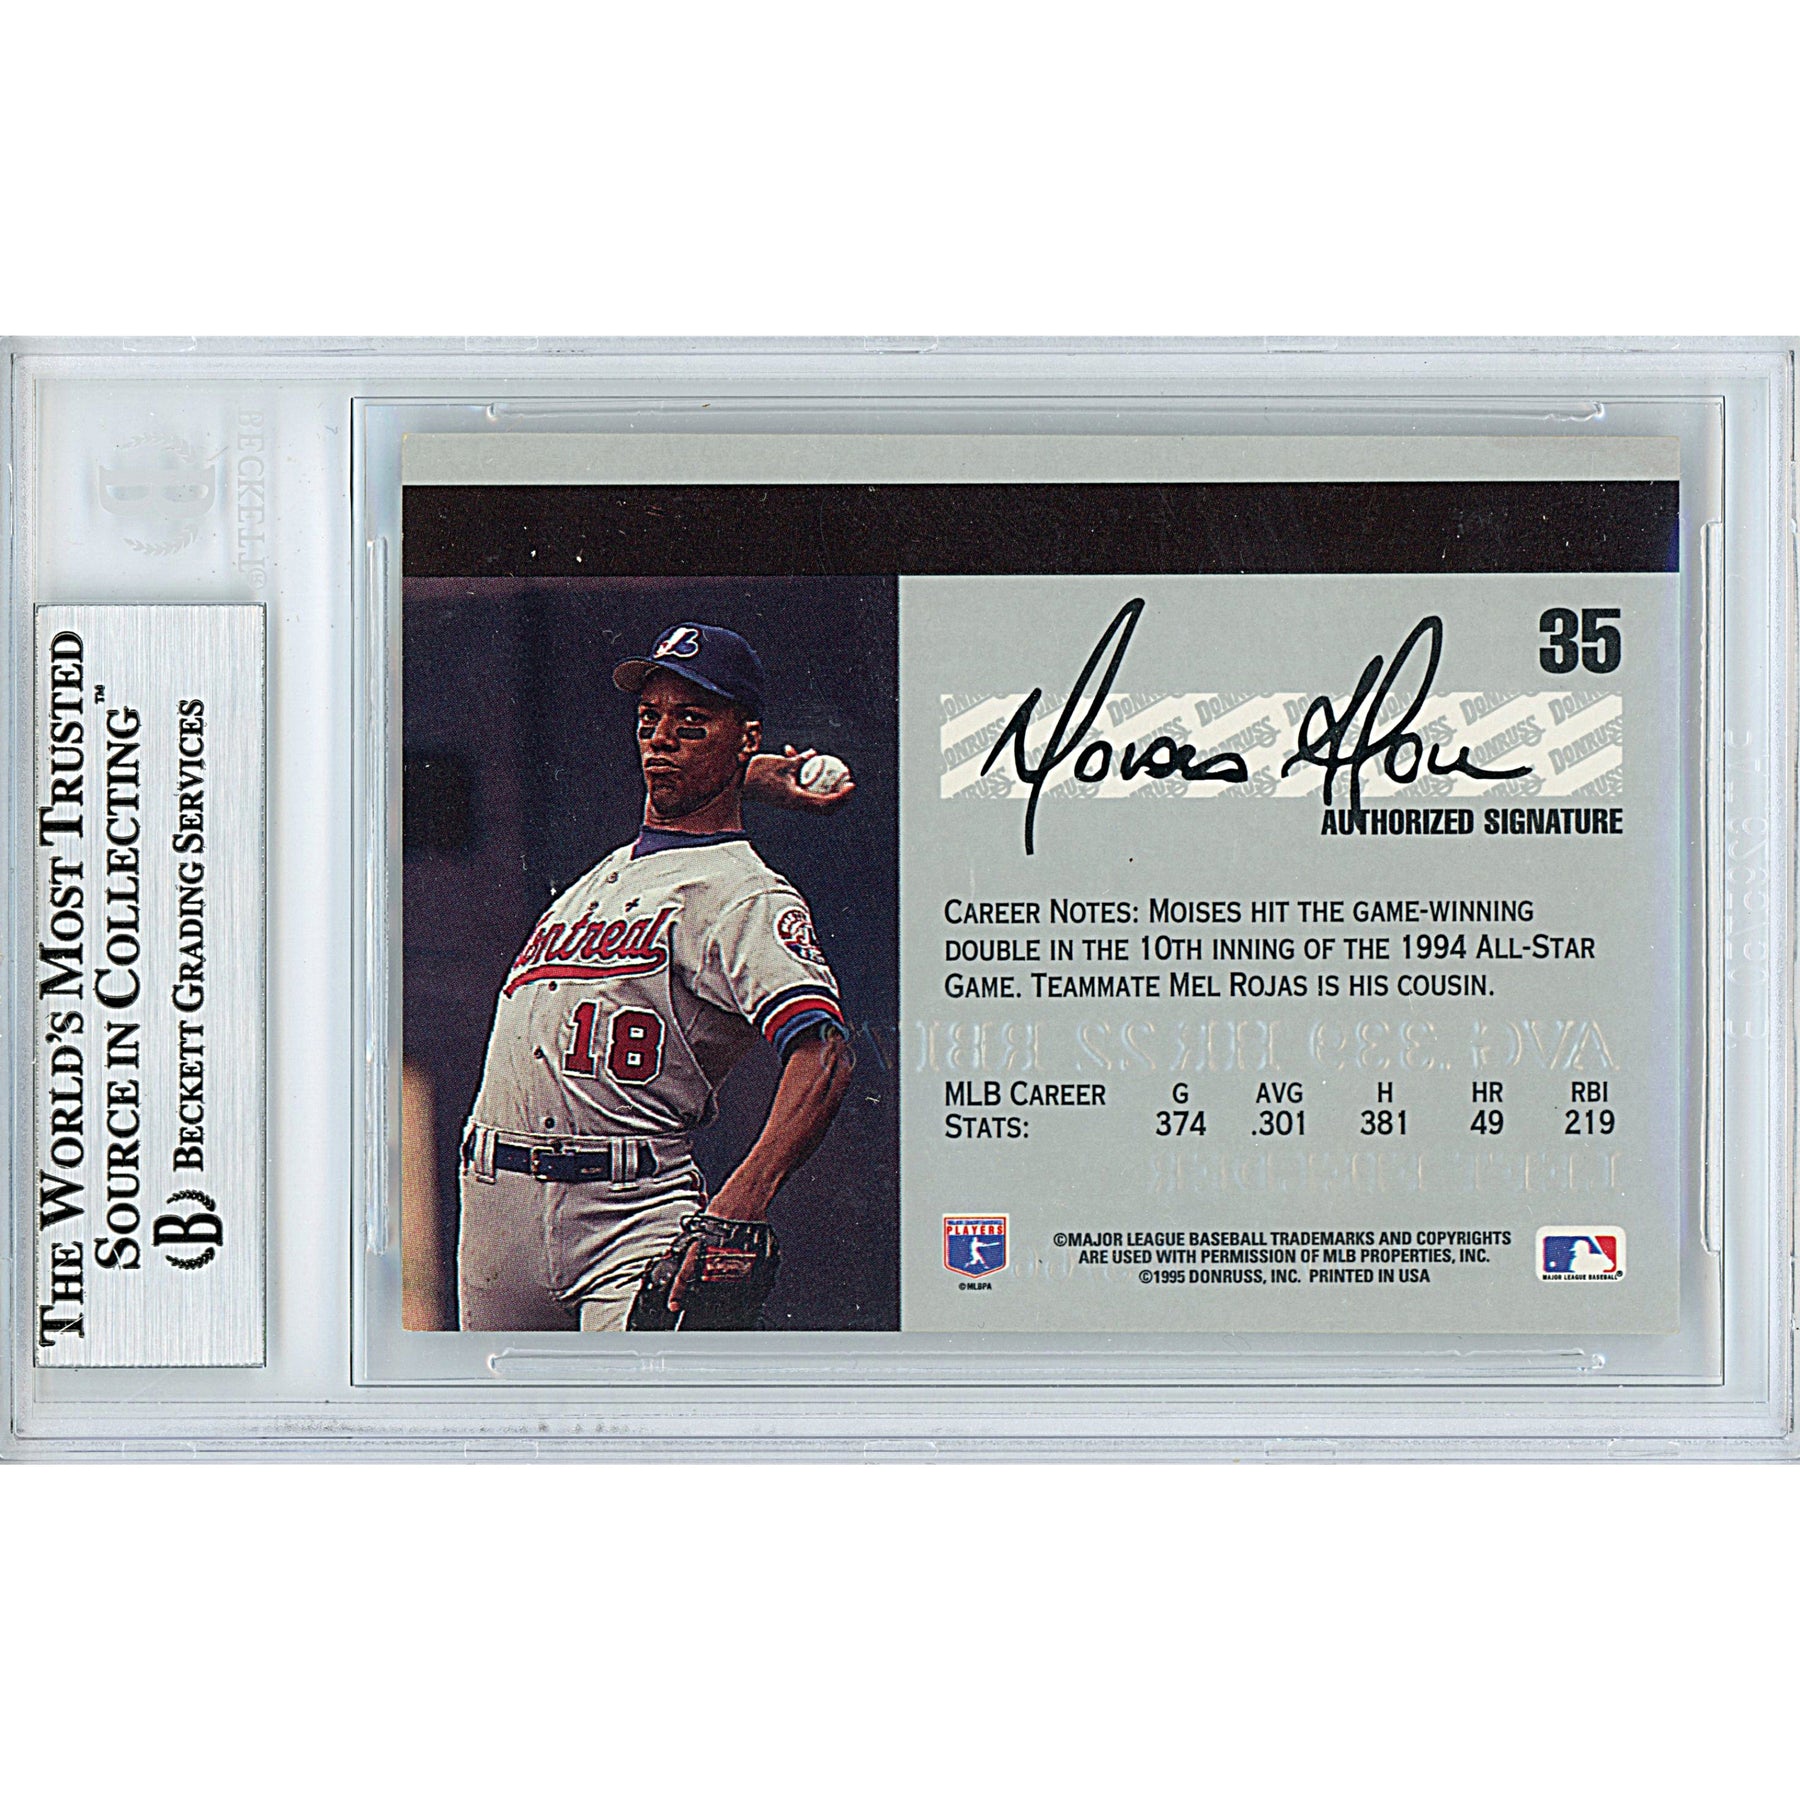 Moises Alou Trading Cards: Values, Tracking & Hot Deals